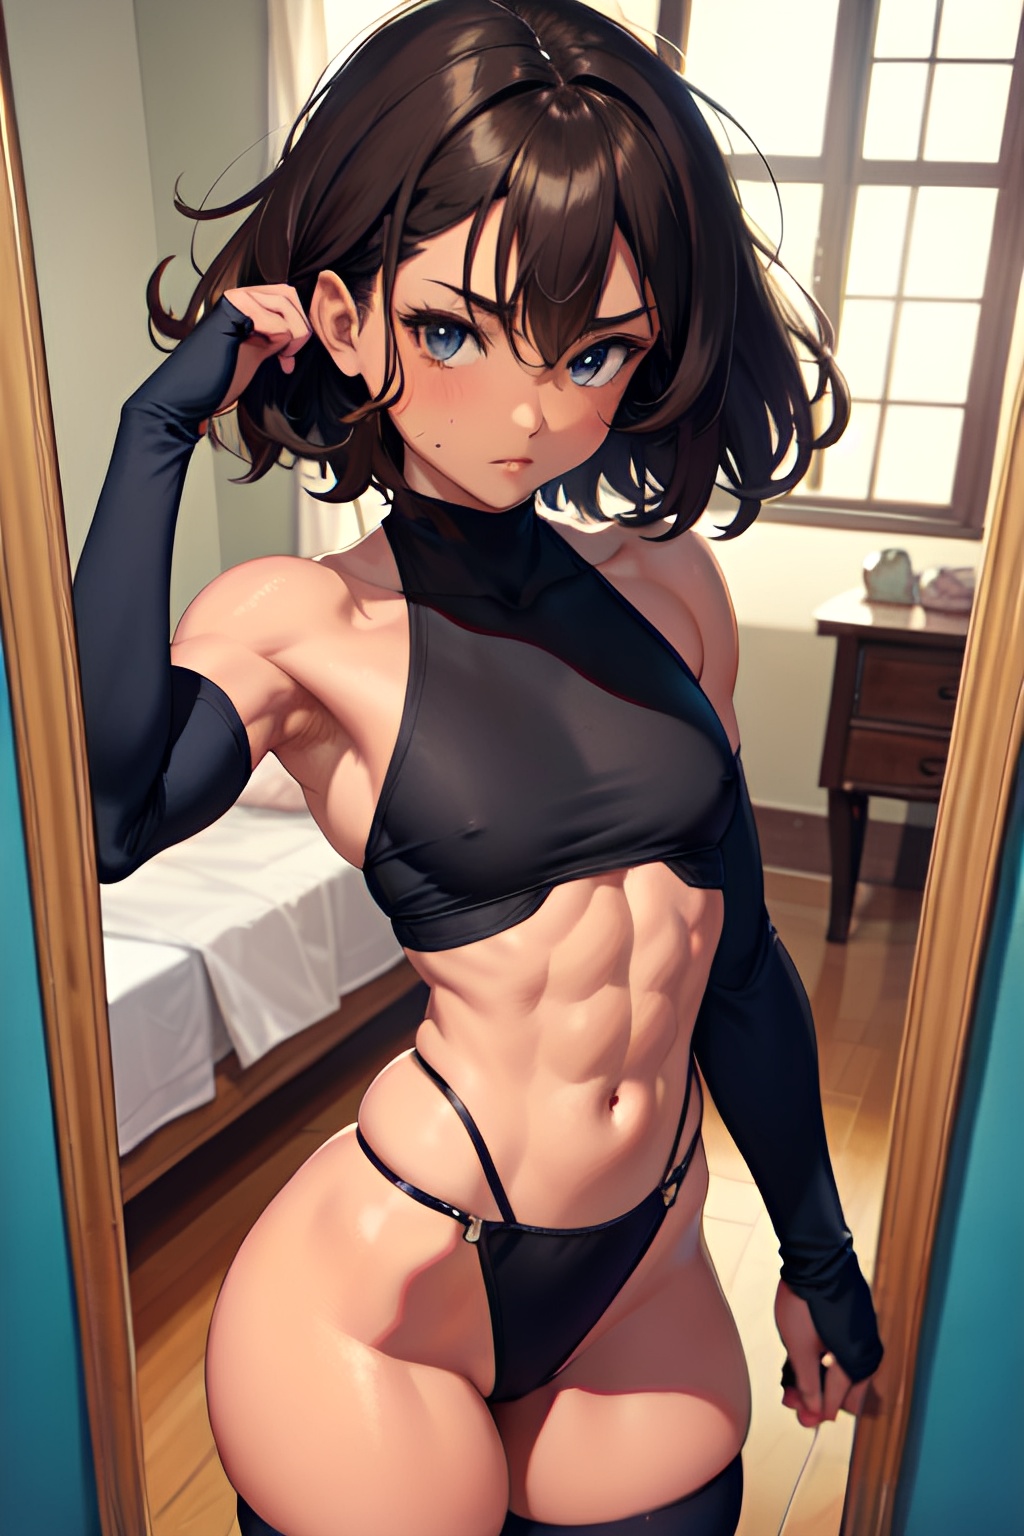 1024px x 1536px - Anime Muscular Small Tits 80s Age Seductive Face Brunette Messy Hair Style  Dark Skin Mirror Selfie Mountains Close Up View T Pose Stockings  3673549955544408203 - AI Hentai